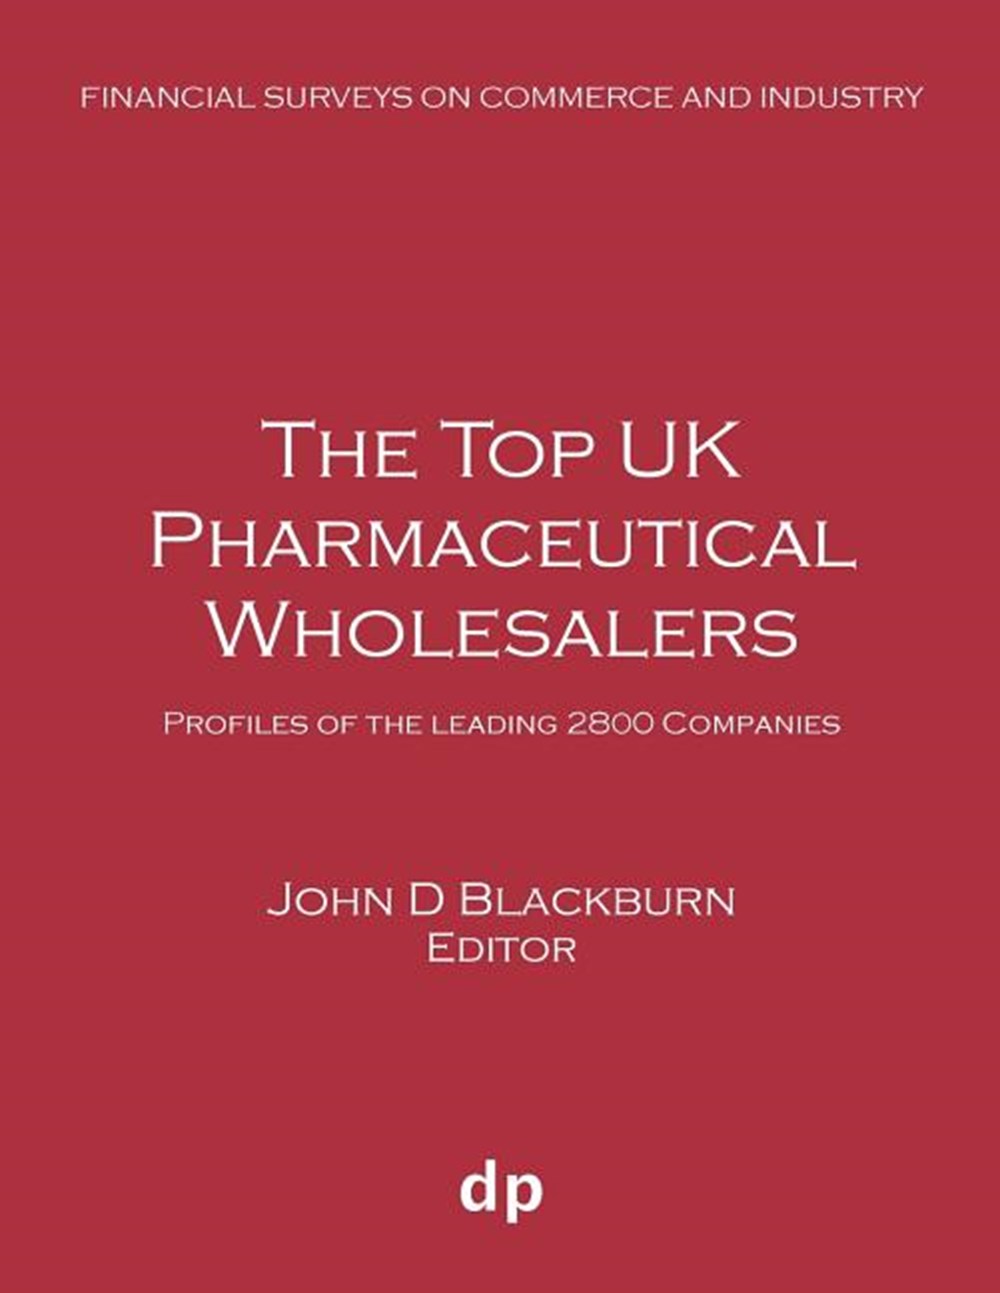 Top UK Pharmaceutical Wholesalers: Profiles of the leading 2800 companies (Summer 2019)